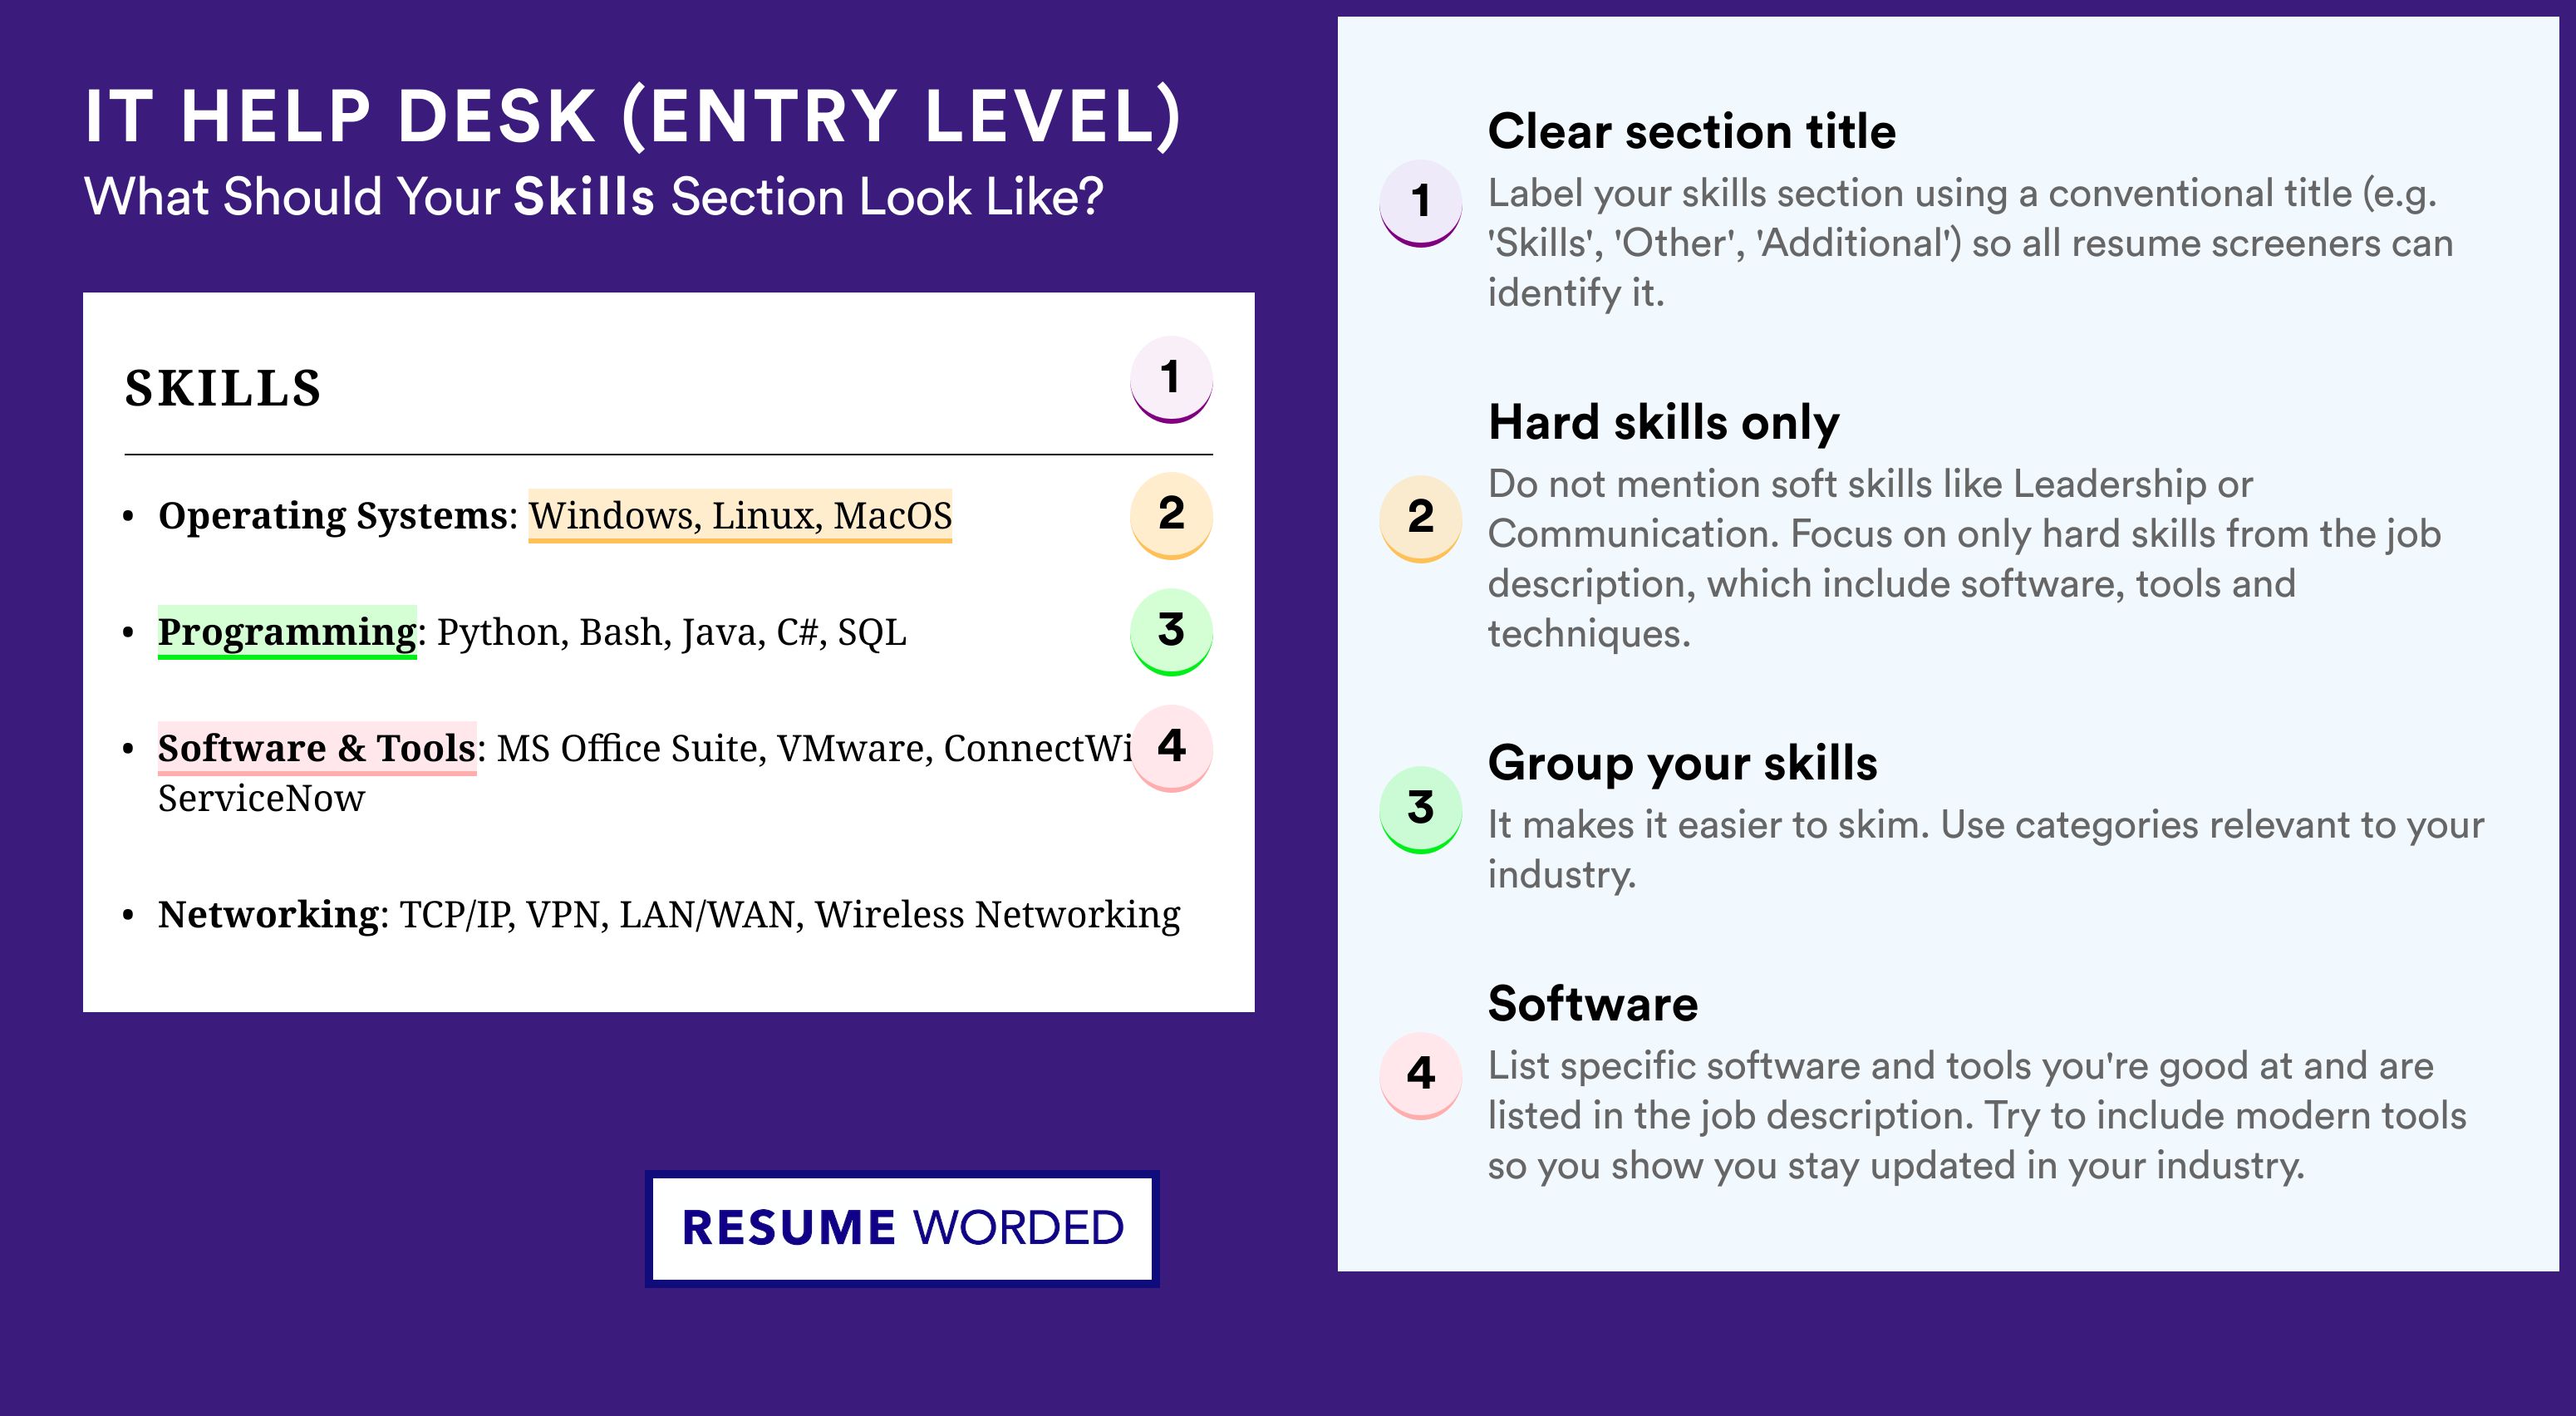 How To Write Your Skills Section - IT Help Desk (Entry Level) Roles